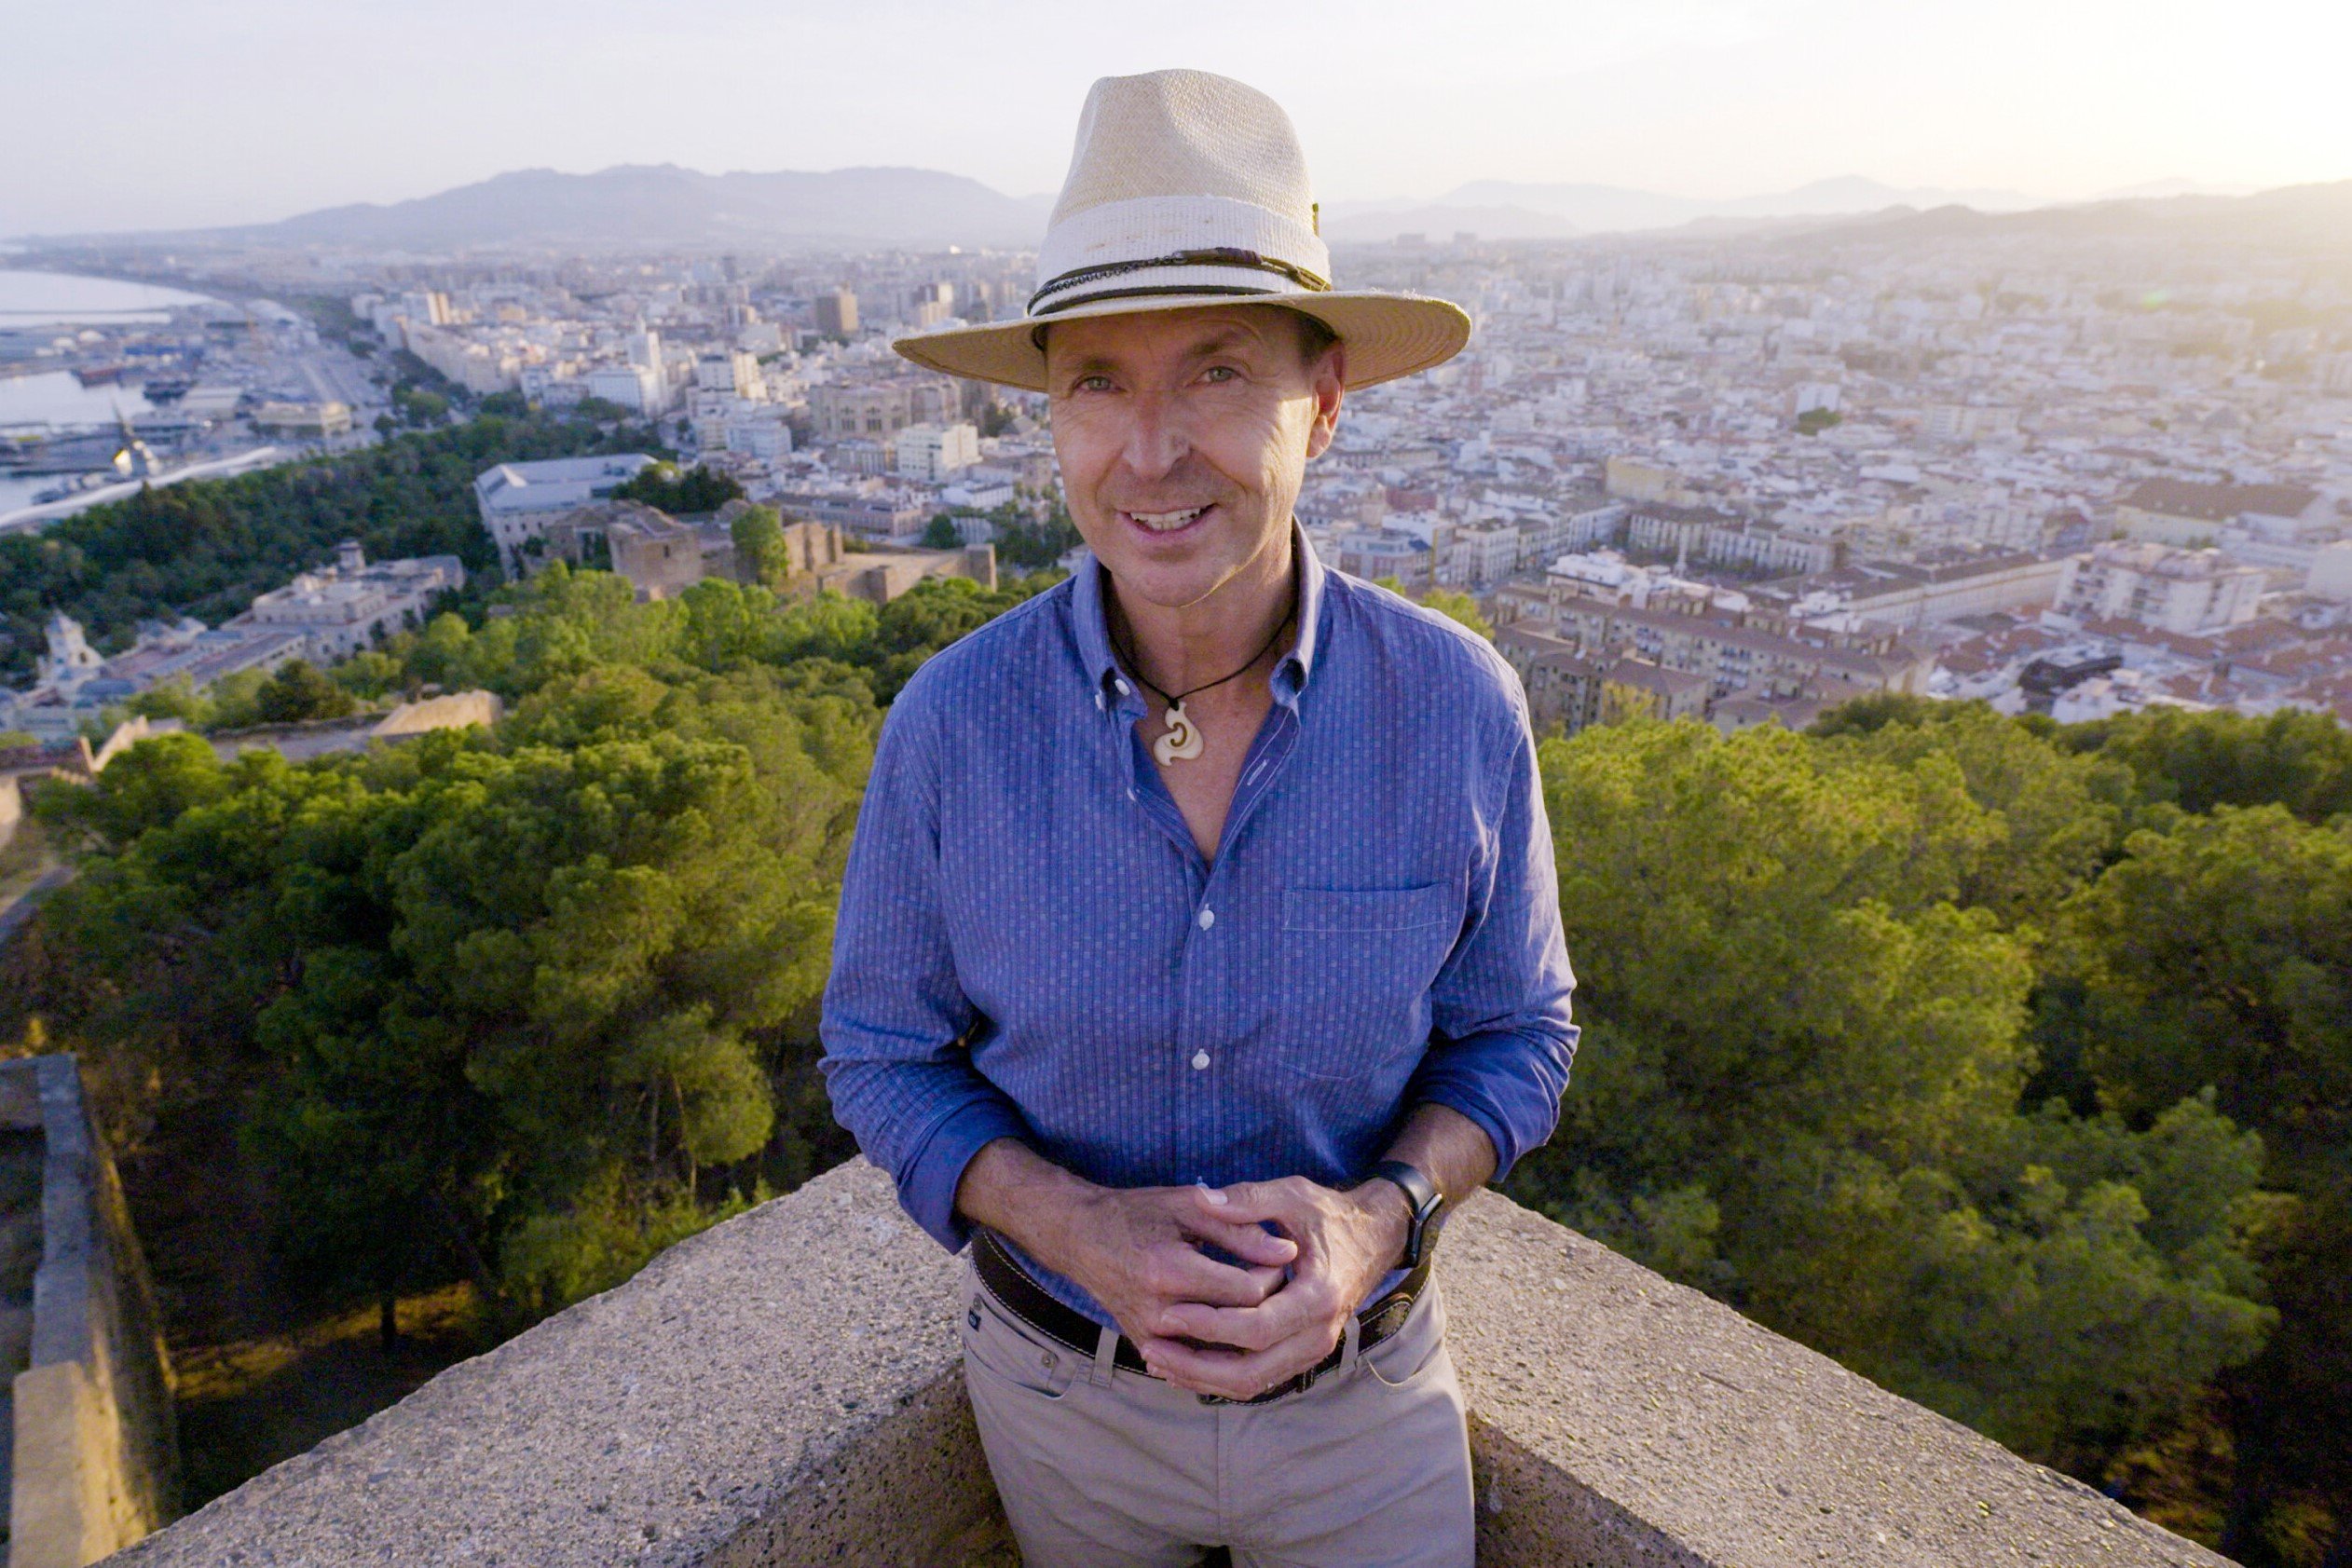 Phil Keoghan, who, according to spoilers, will host 'The Amazing Race 35' on CBS, wears a blute button-down shirt, khakis, and a tan hat.